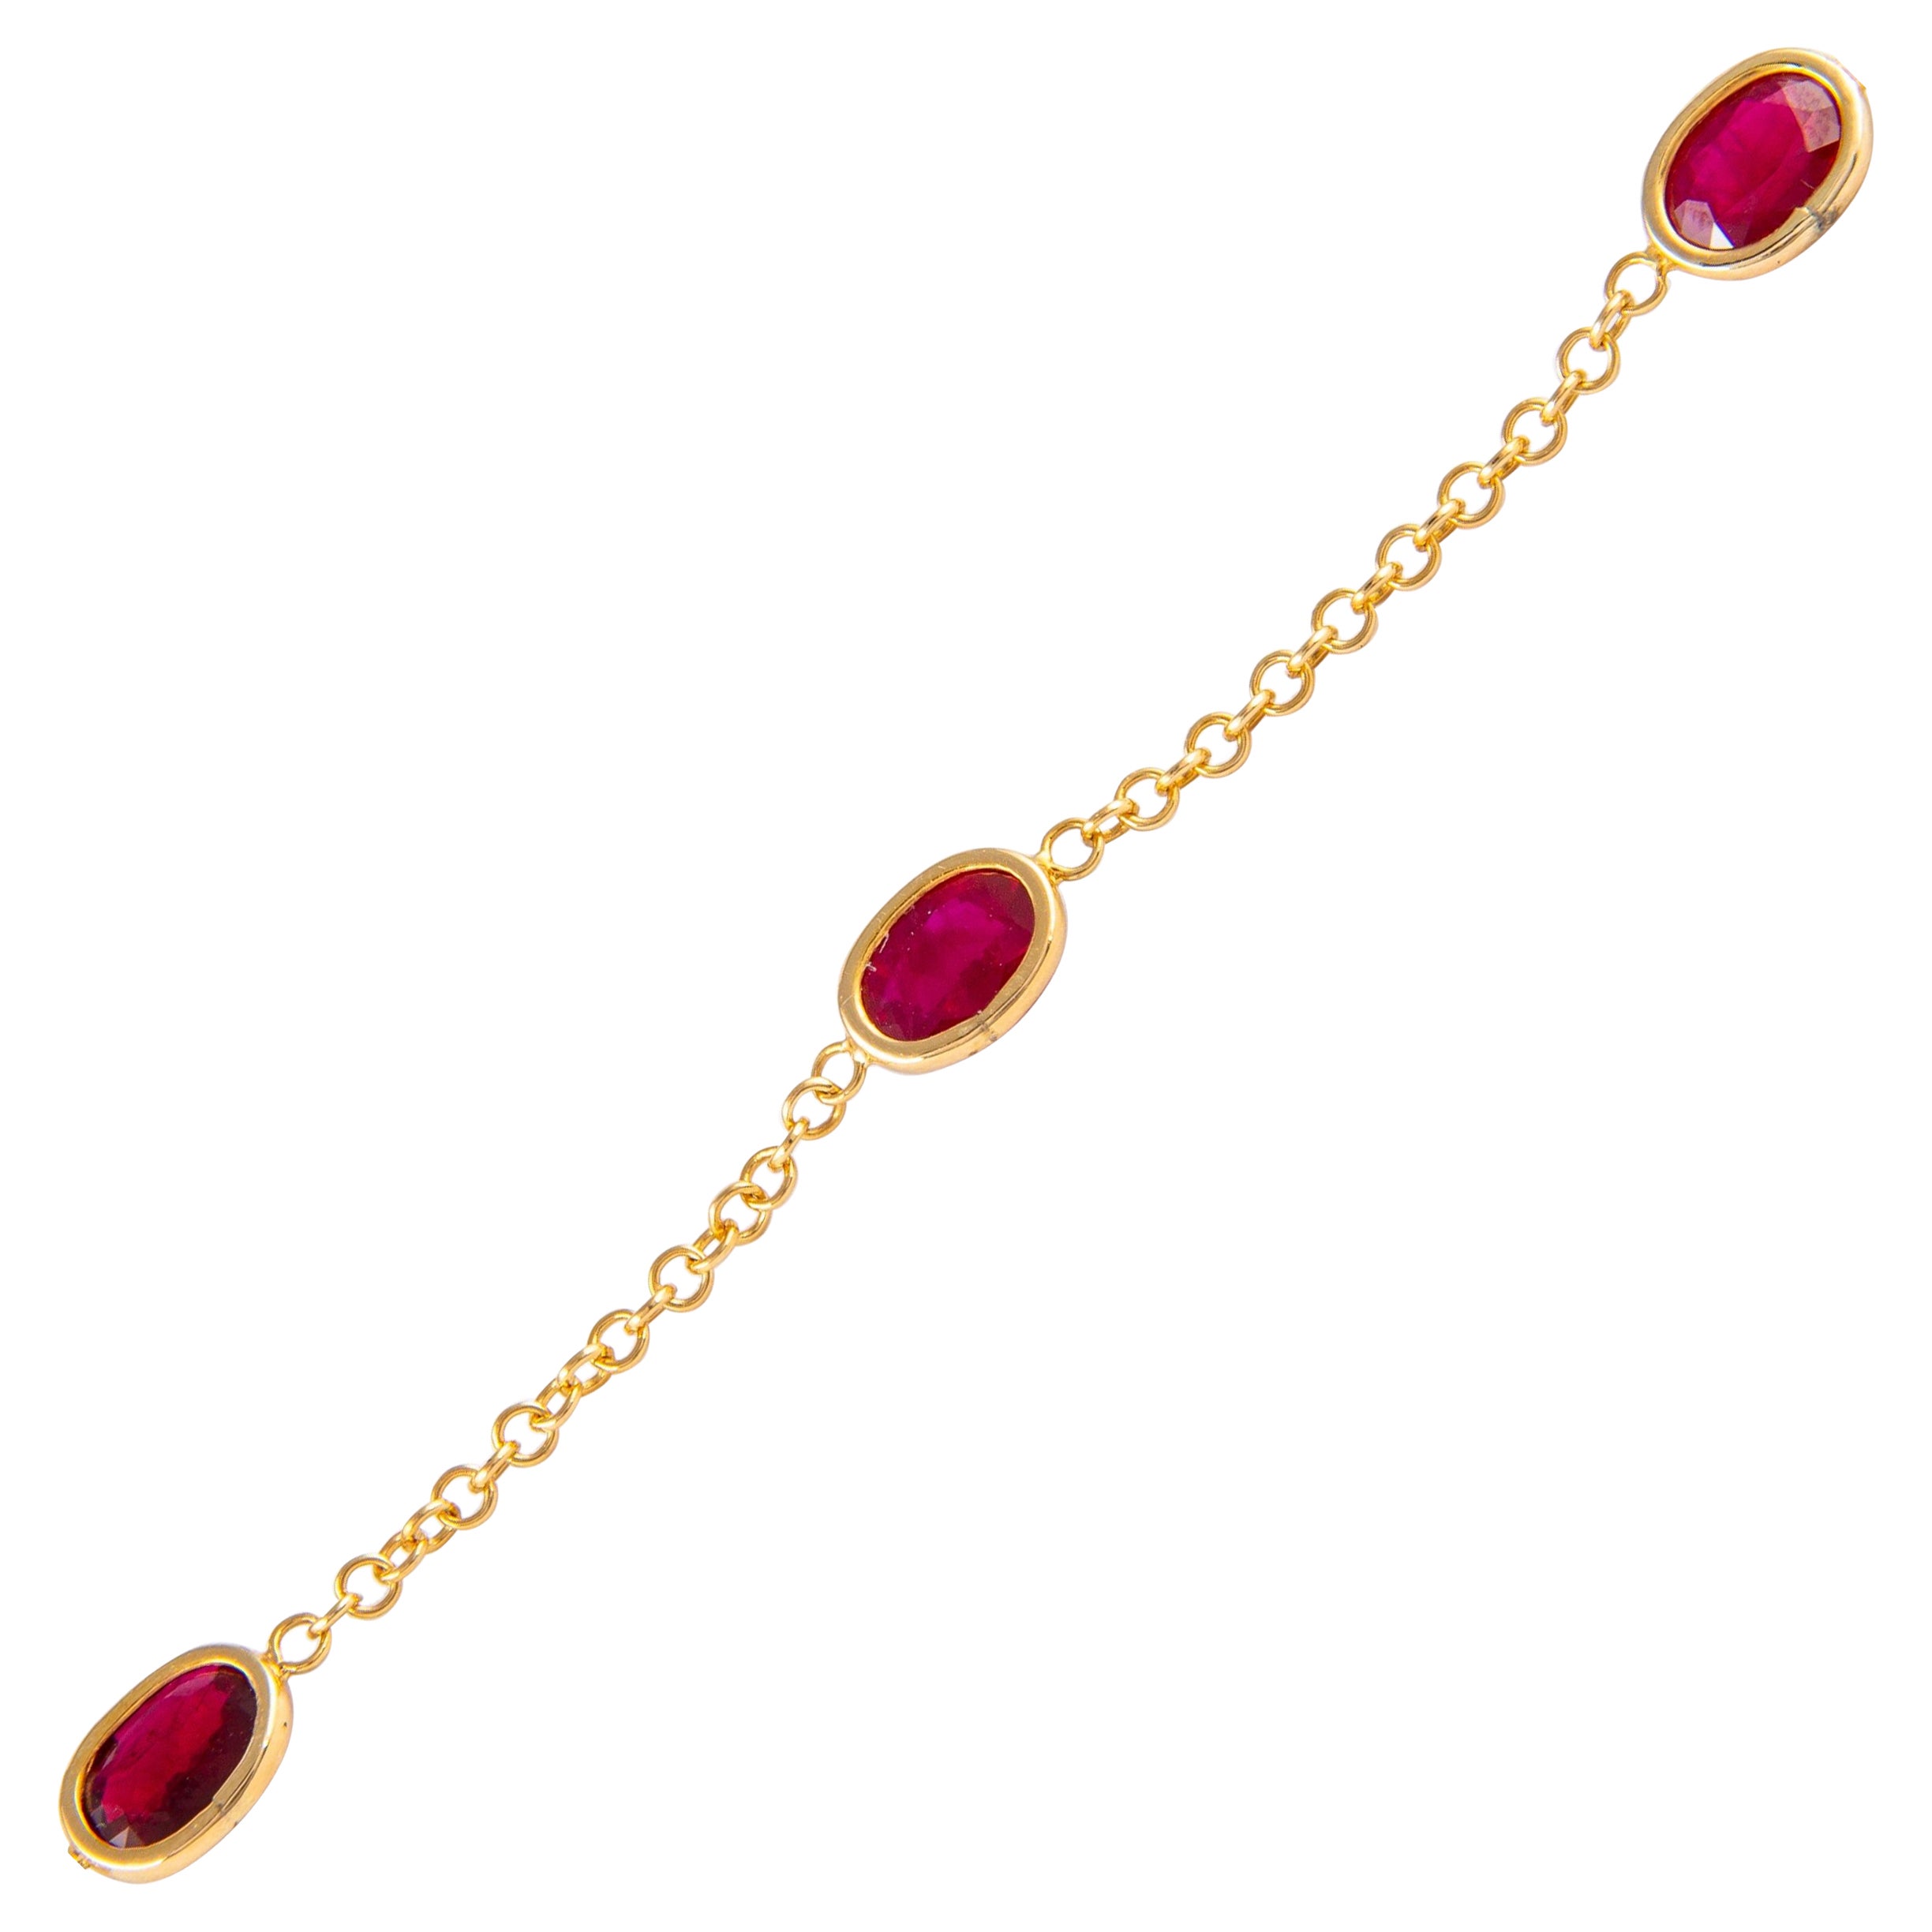 Alexander 4.35 Carat Rubies by the Yard Bracelet 18k Yellow Gold For Sale